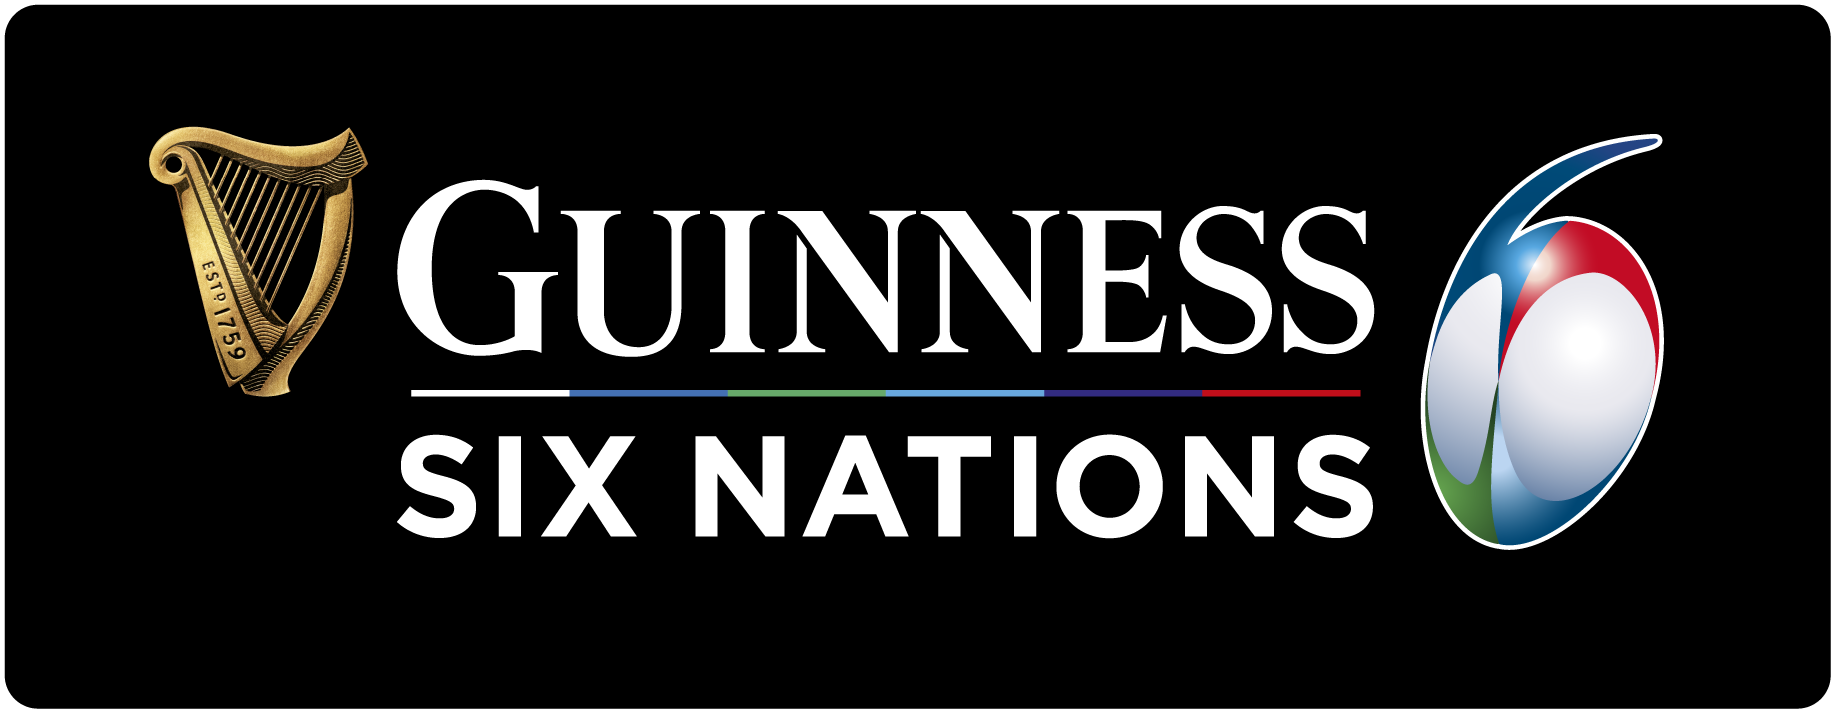 GUINNESS SIX NATIONS LANDSCAPE STACKED RGB